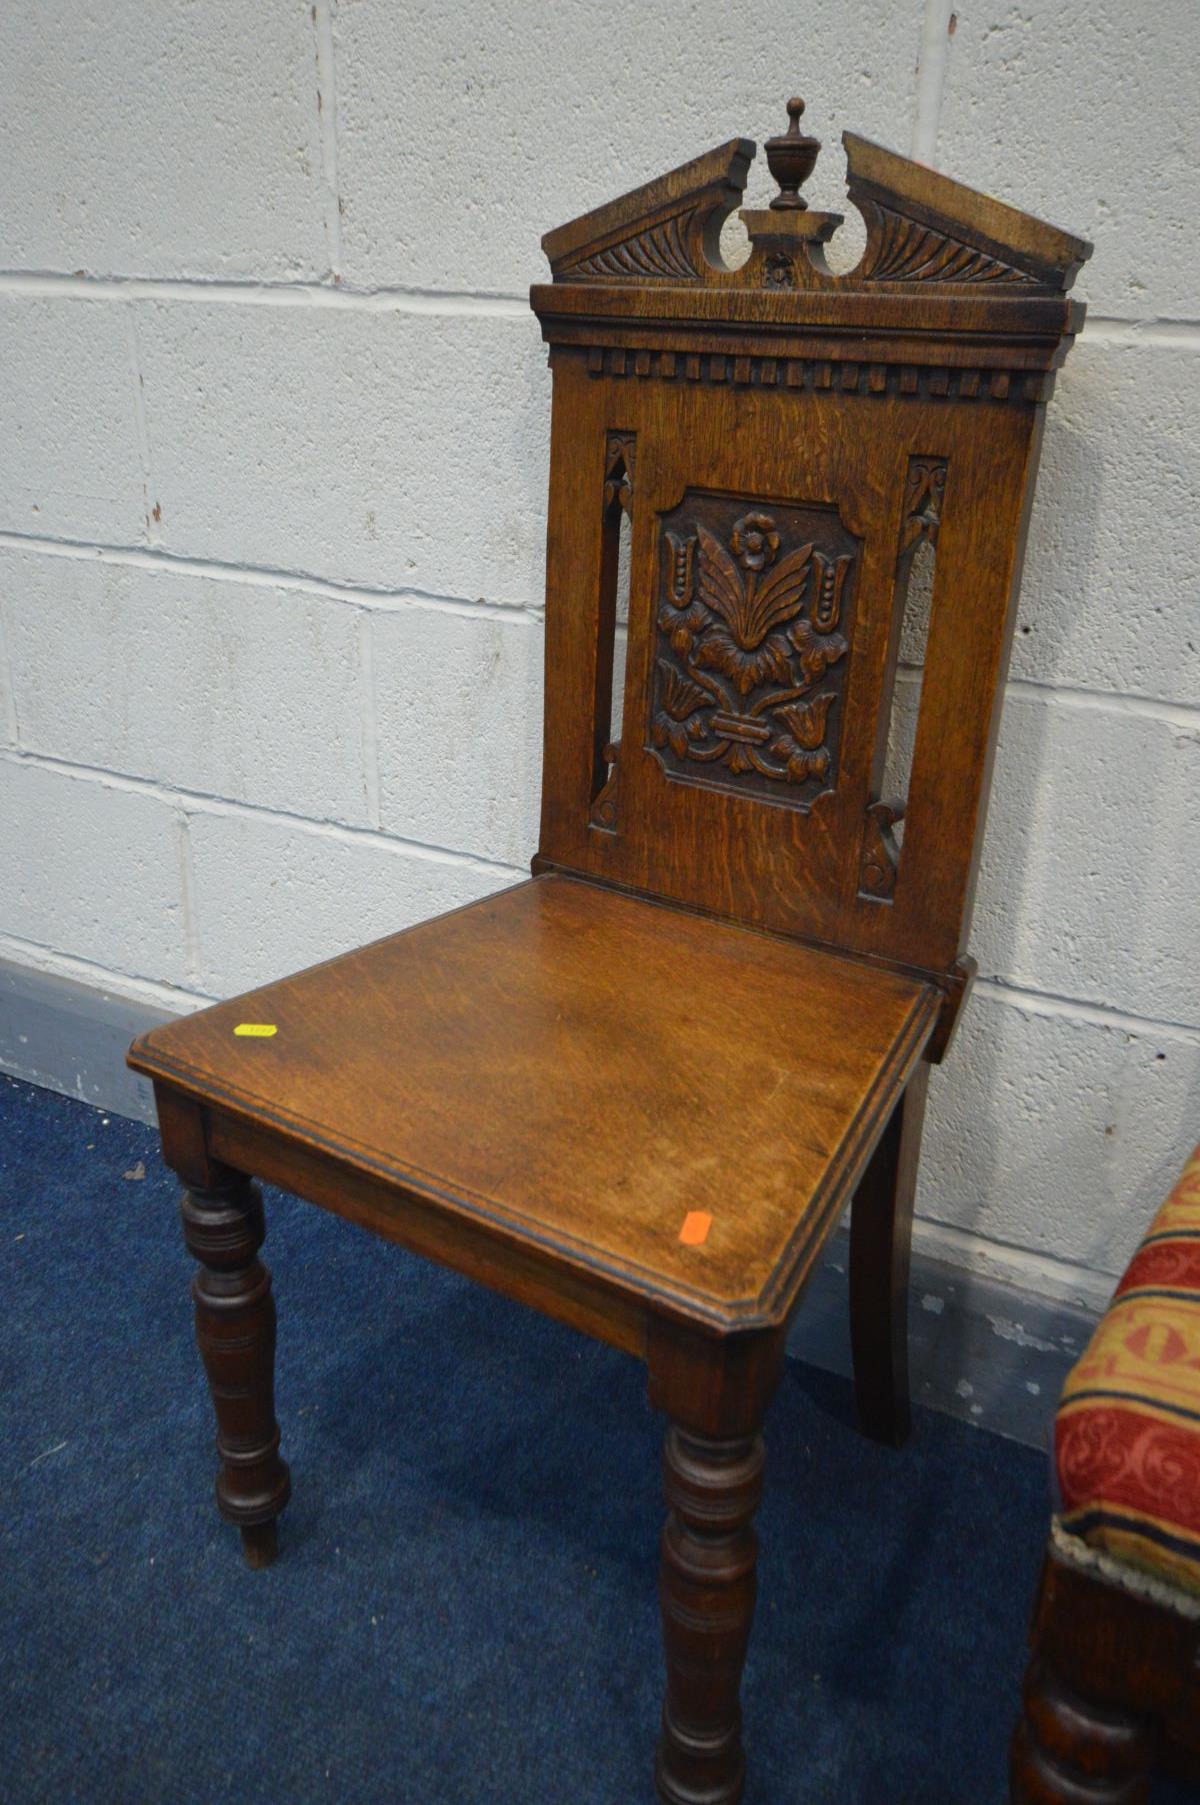 A PAIR OF EDWARDIAN OAK HALL CHAIRS, with quatrefoil detail, and a carved oak hall chair (3) - Image 3 of 3